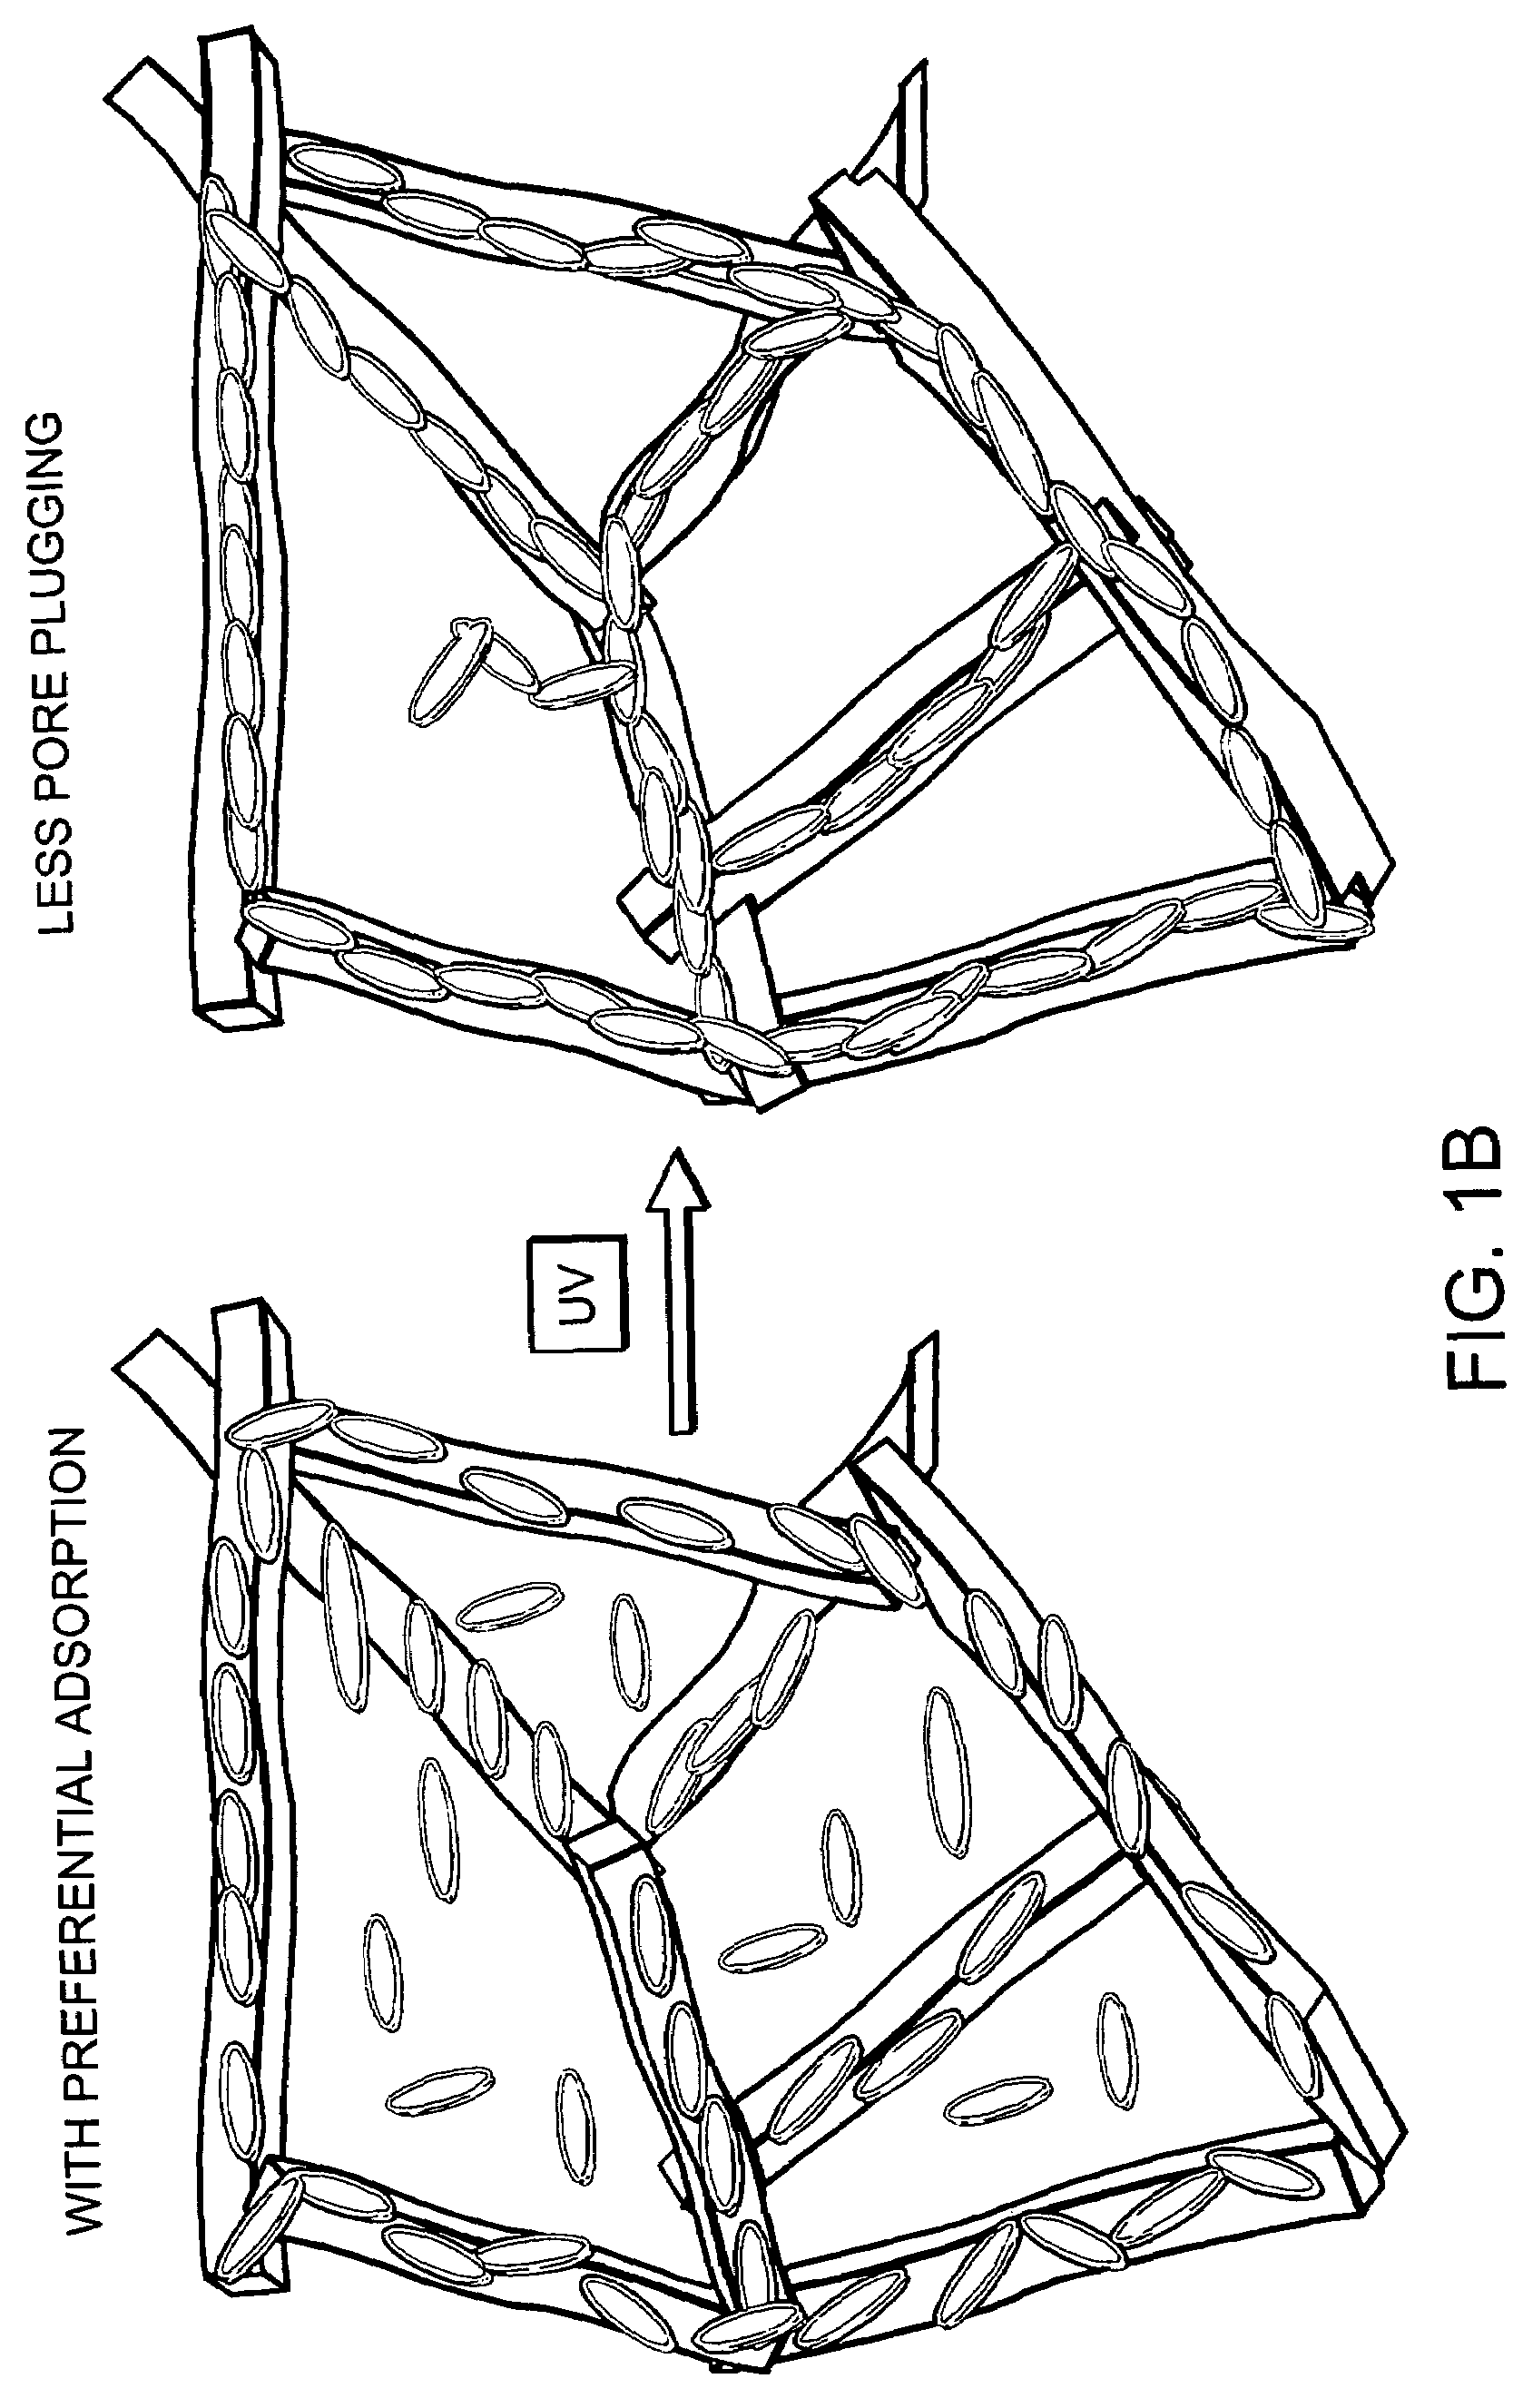 Porous composite membrane and method for making the same